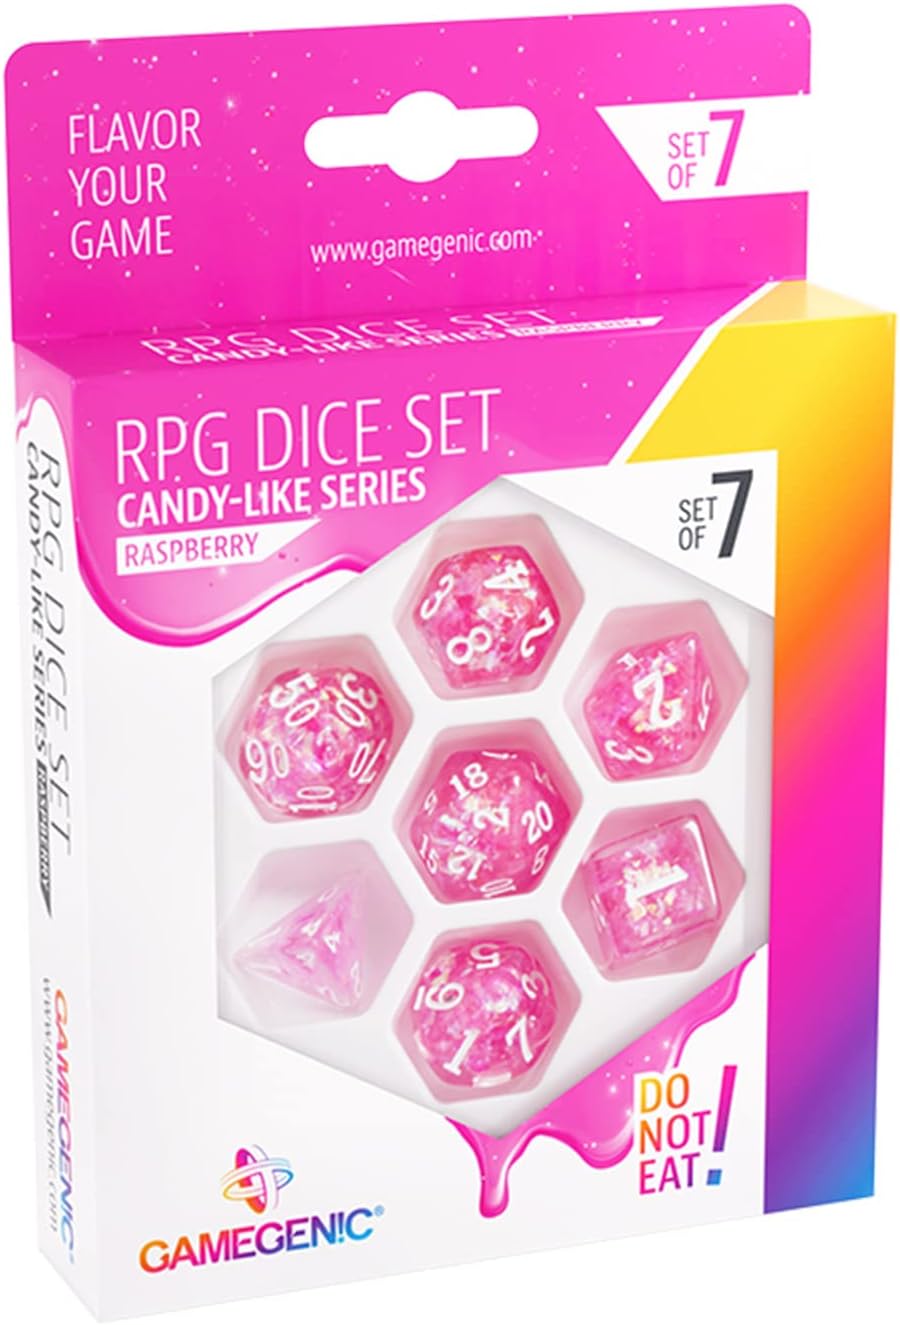 Candy-Like Series RPG Dice Set | Set of 7 Dice in a Variety of Sizes Designed fo